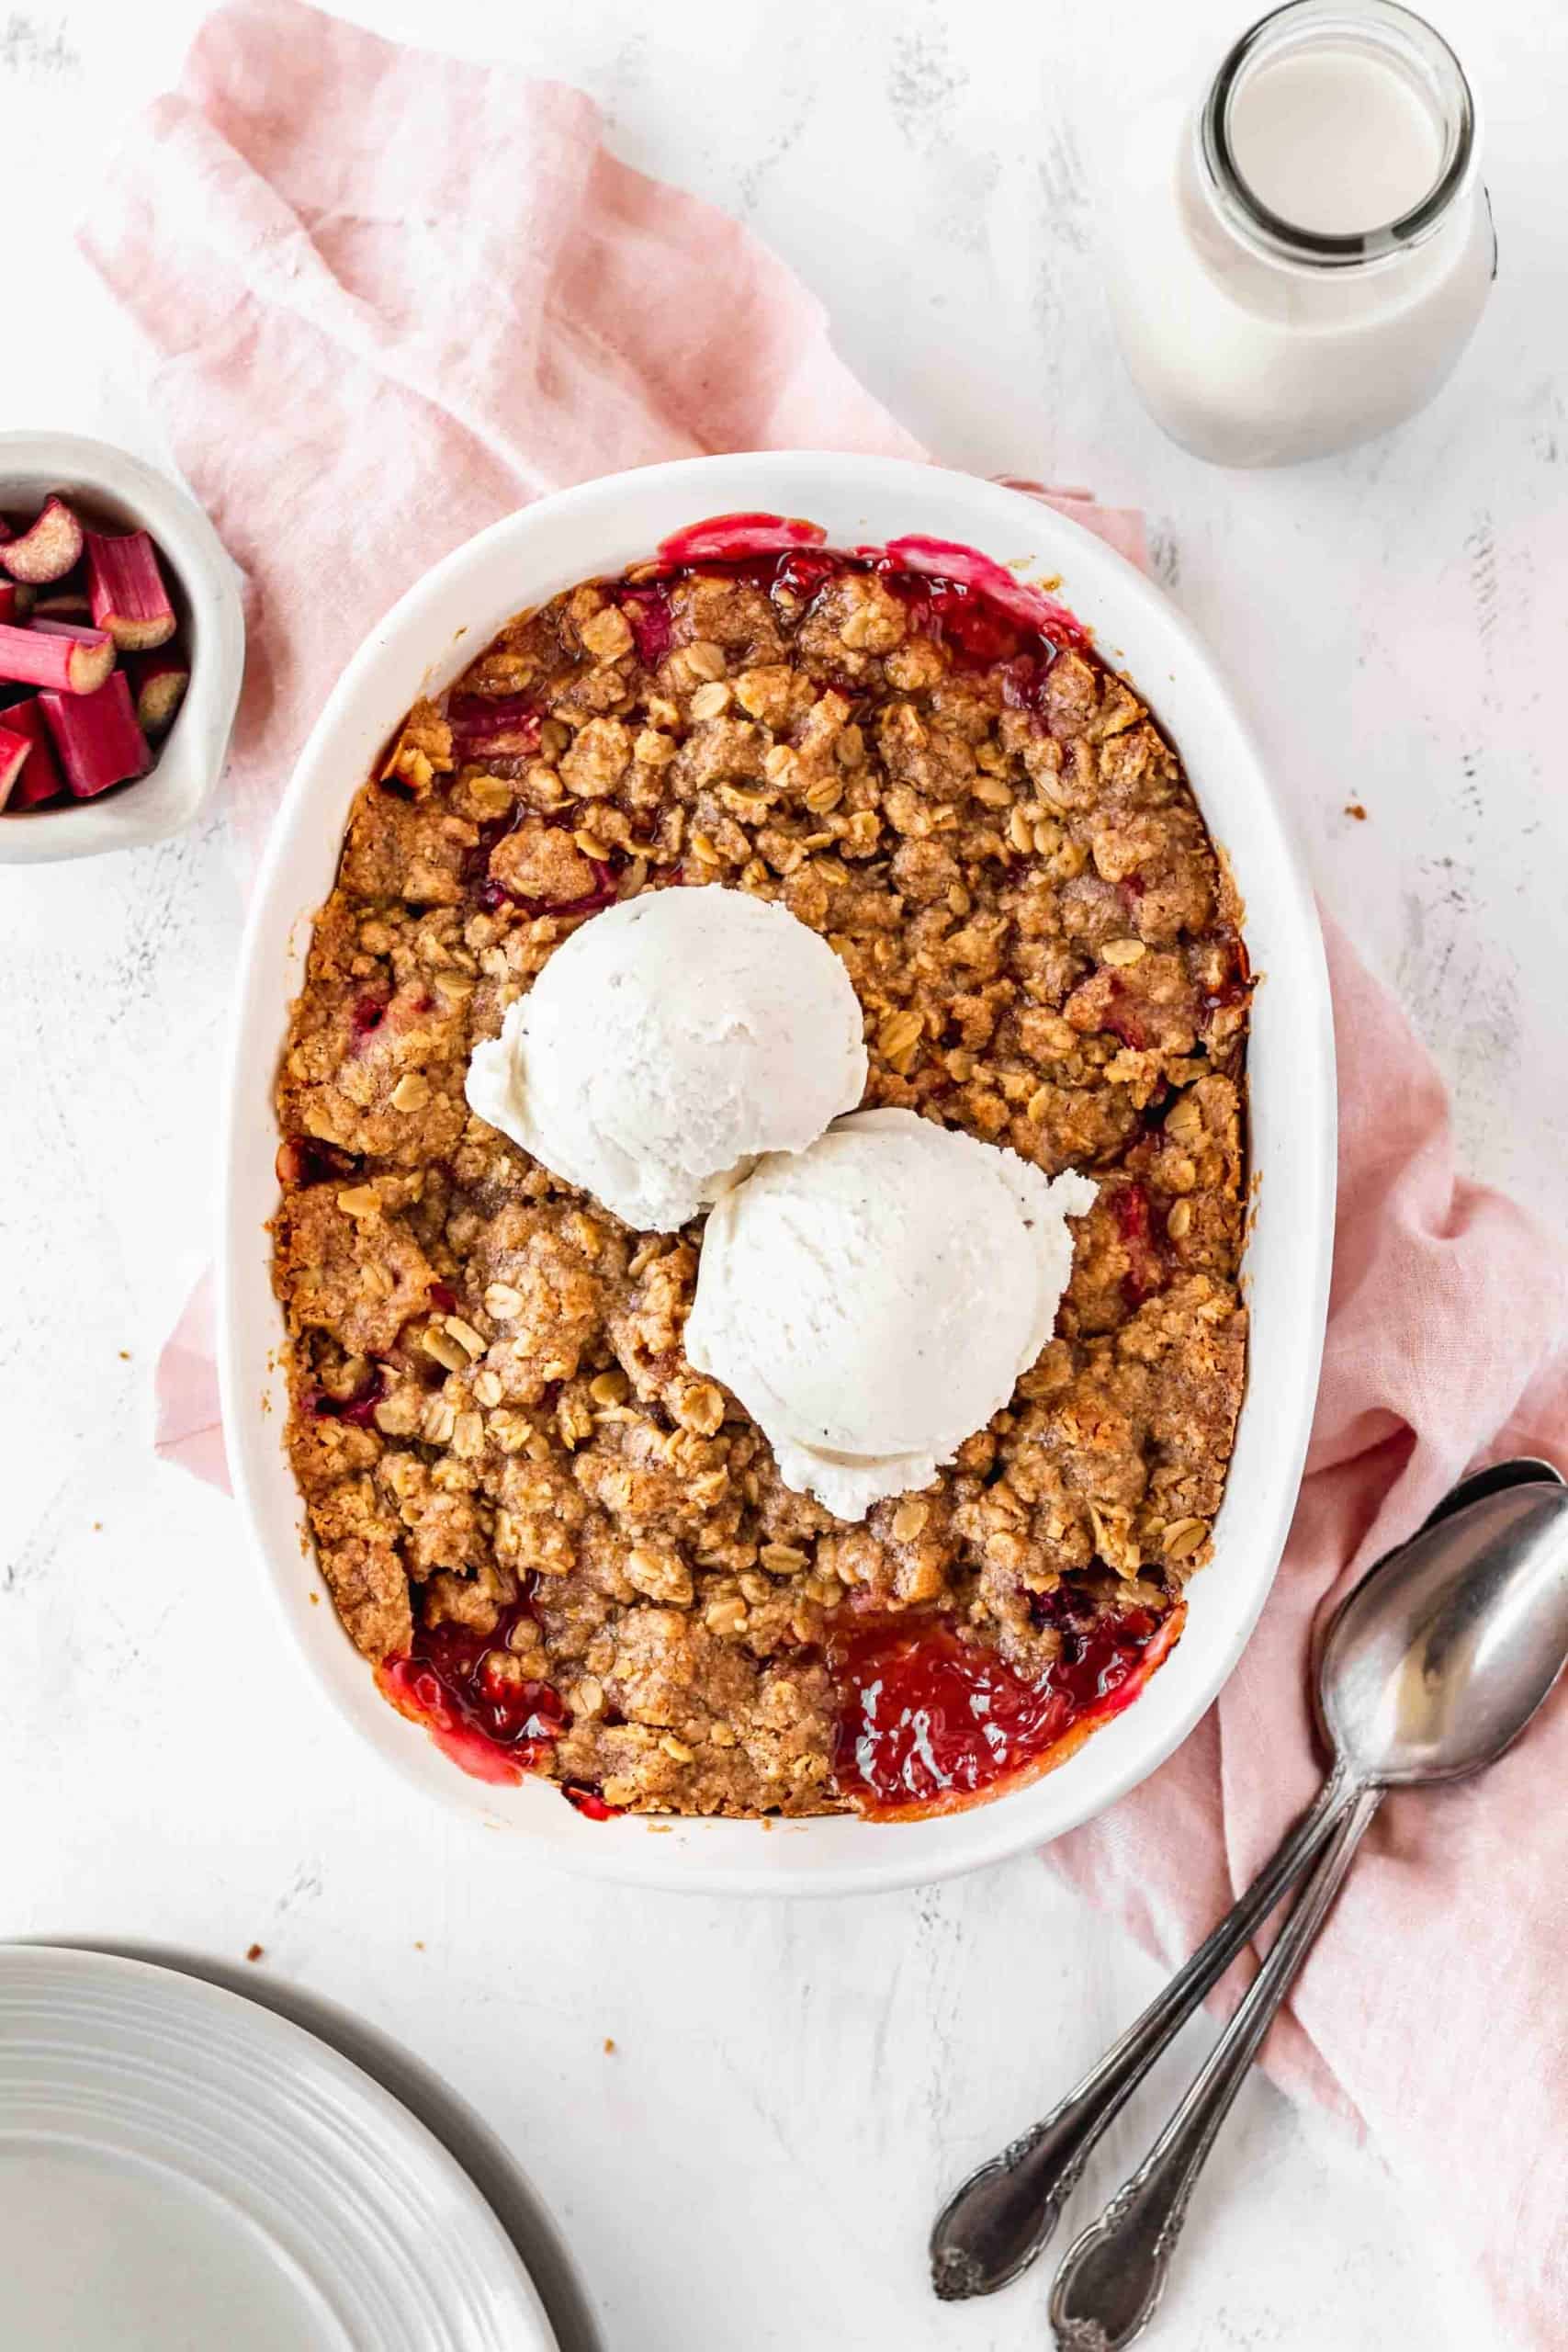 Gluten free and dairy free rhubarb crisp with two scoops of ice cream